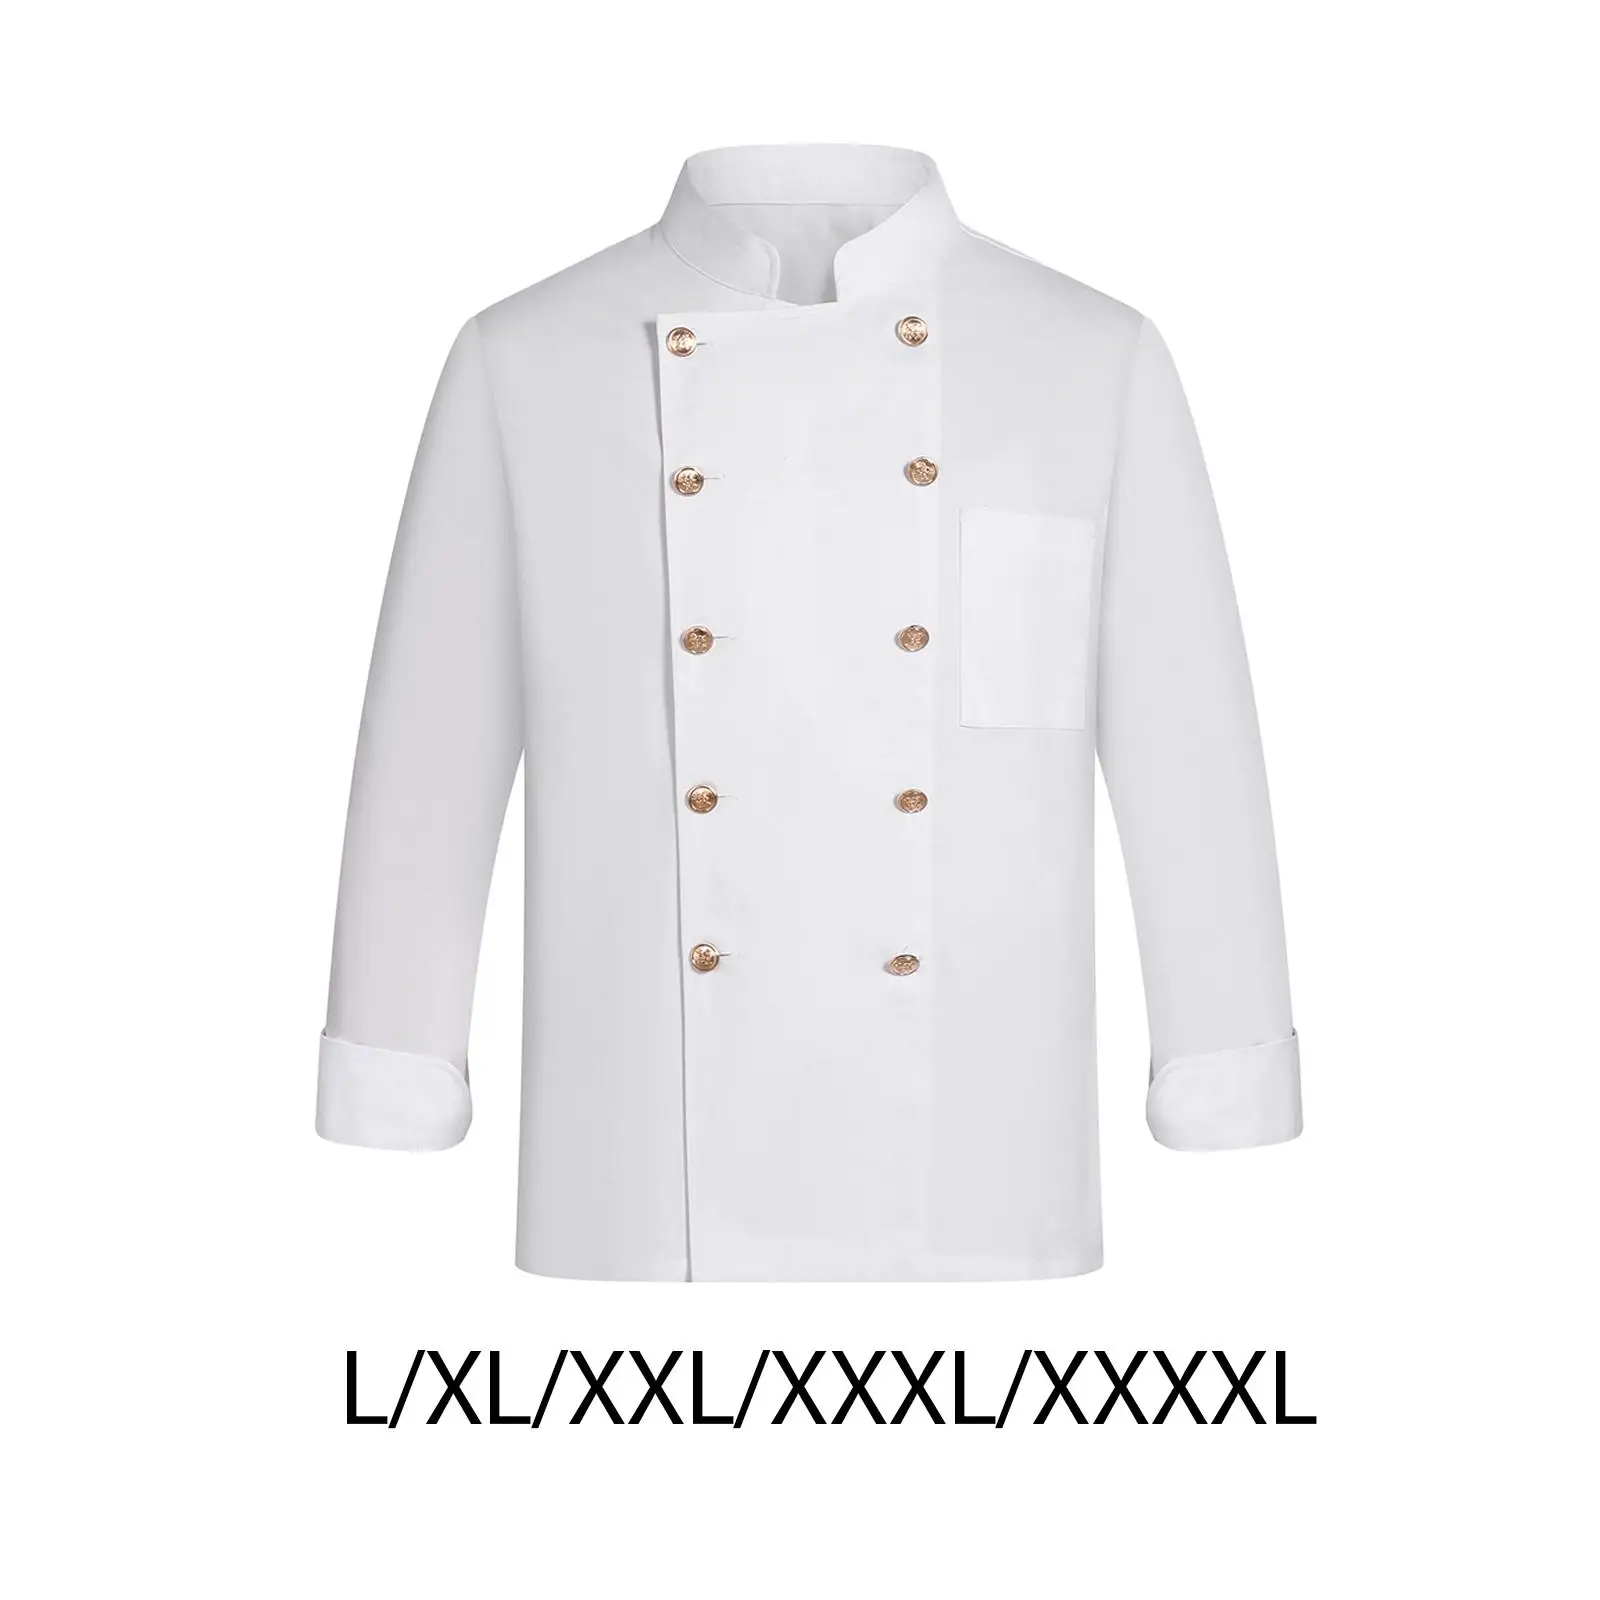 Universal Chef Clothes Workwear Jacket Breathable Sweat Absorption Abrasion Resistant Industry Restaurant Kitchen Waiter Hotel